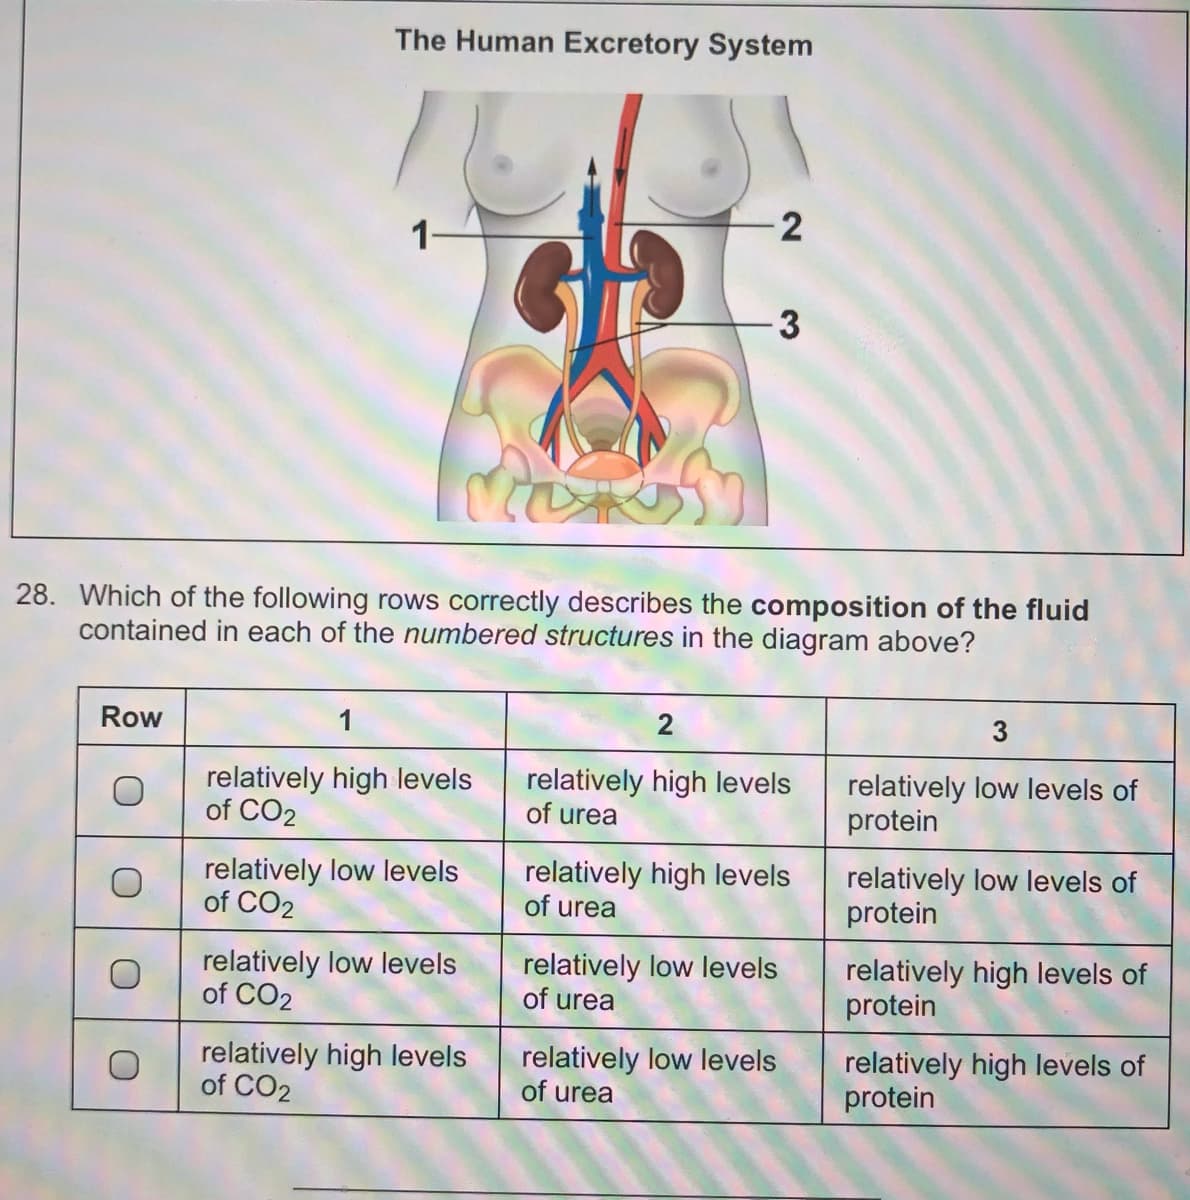 The Human Excretory System
1-
3
28. Which of the following rows correctly describes the composition of the fluid
contained in each of the numbered structures in the diagram above?
Row
1
3
relatively high levels
of CO2
relatively high levels
of urea
relatively low levels of
protein
relatively low levels
of CO2
relatively high levels
of urea
relatively low levels of
protein
relatively low levels
of CO2
relatively low levels
of urea
relatively high levels of
protein
relatively high levels
of CO2
relatively low levels
of urea
relatively high levels of
protein
2.
